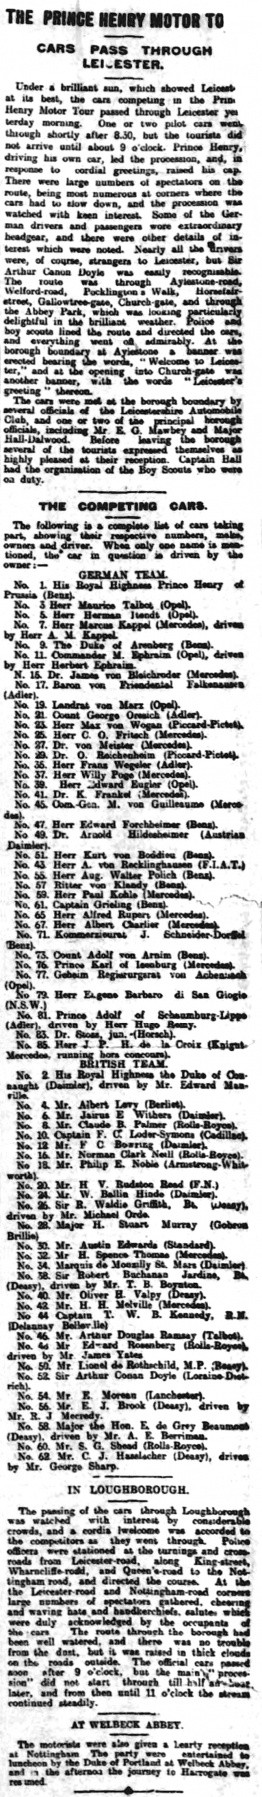 List of drivers in British press (Leicester Chronicle, 8 july 1911, p. 13)